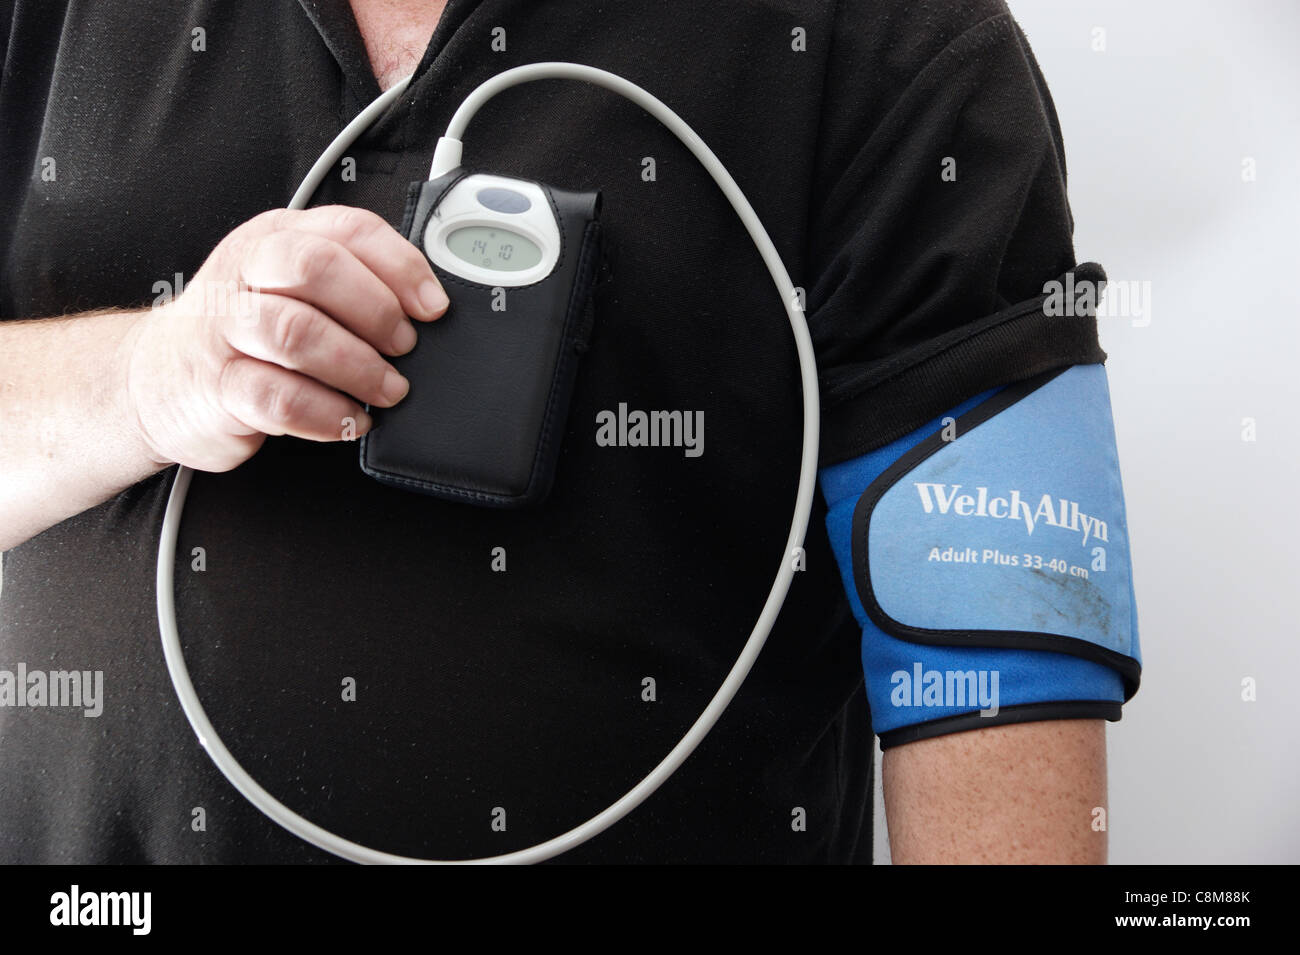 24 hour blood pressure monitoring - Stock Image - C016/7271